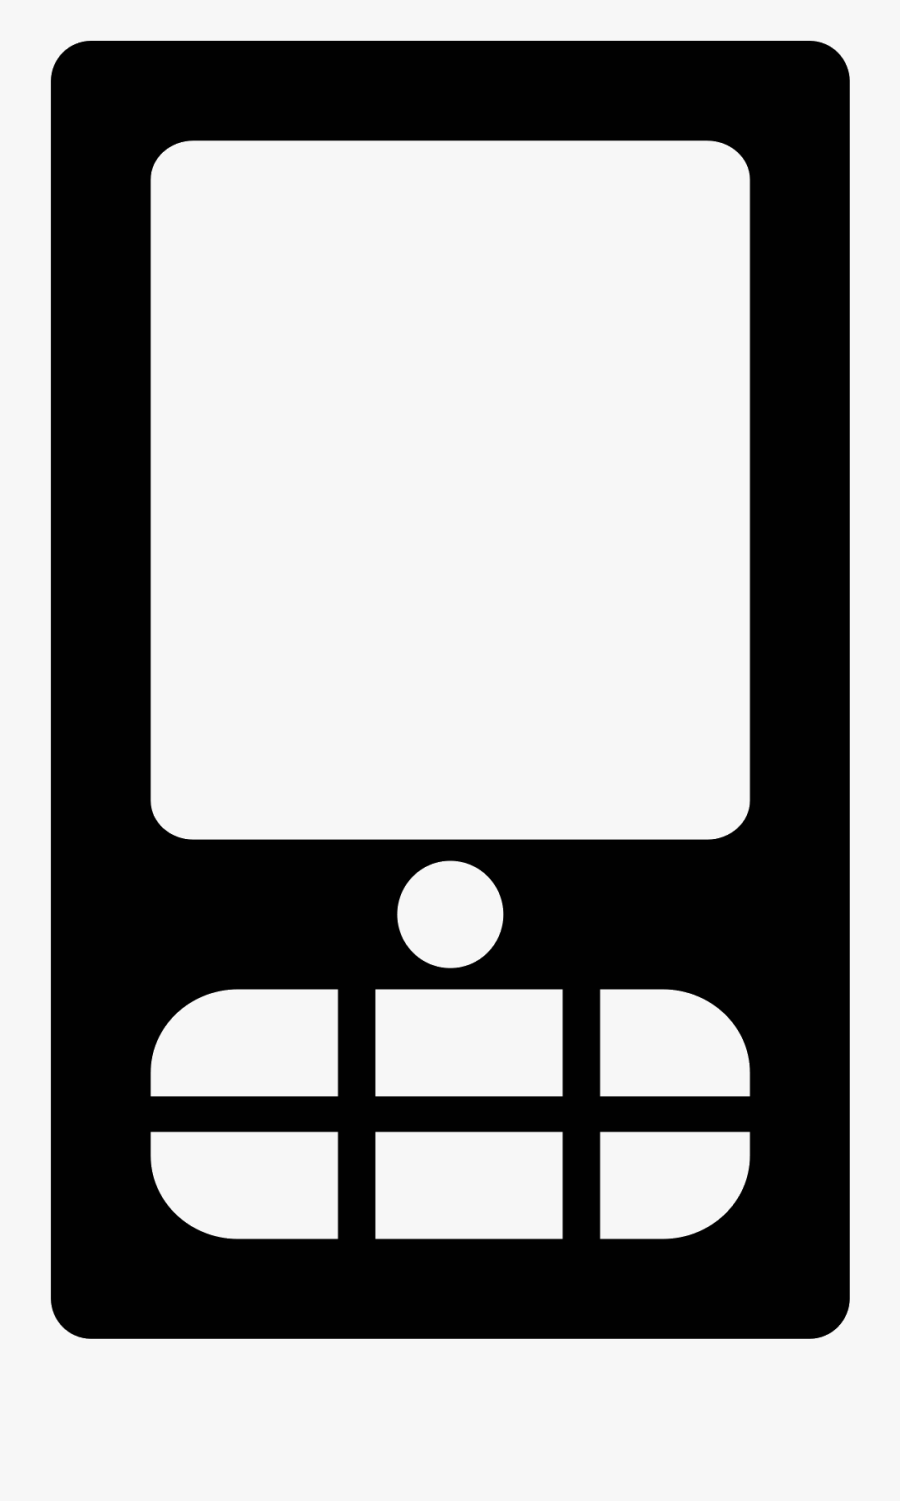 Smartphone Mobile Icon Free - Mobile Symbol In Png, Transparent Clipart